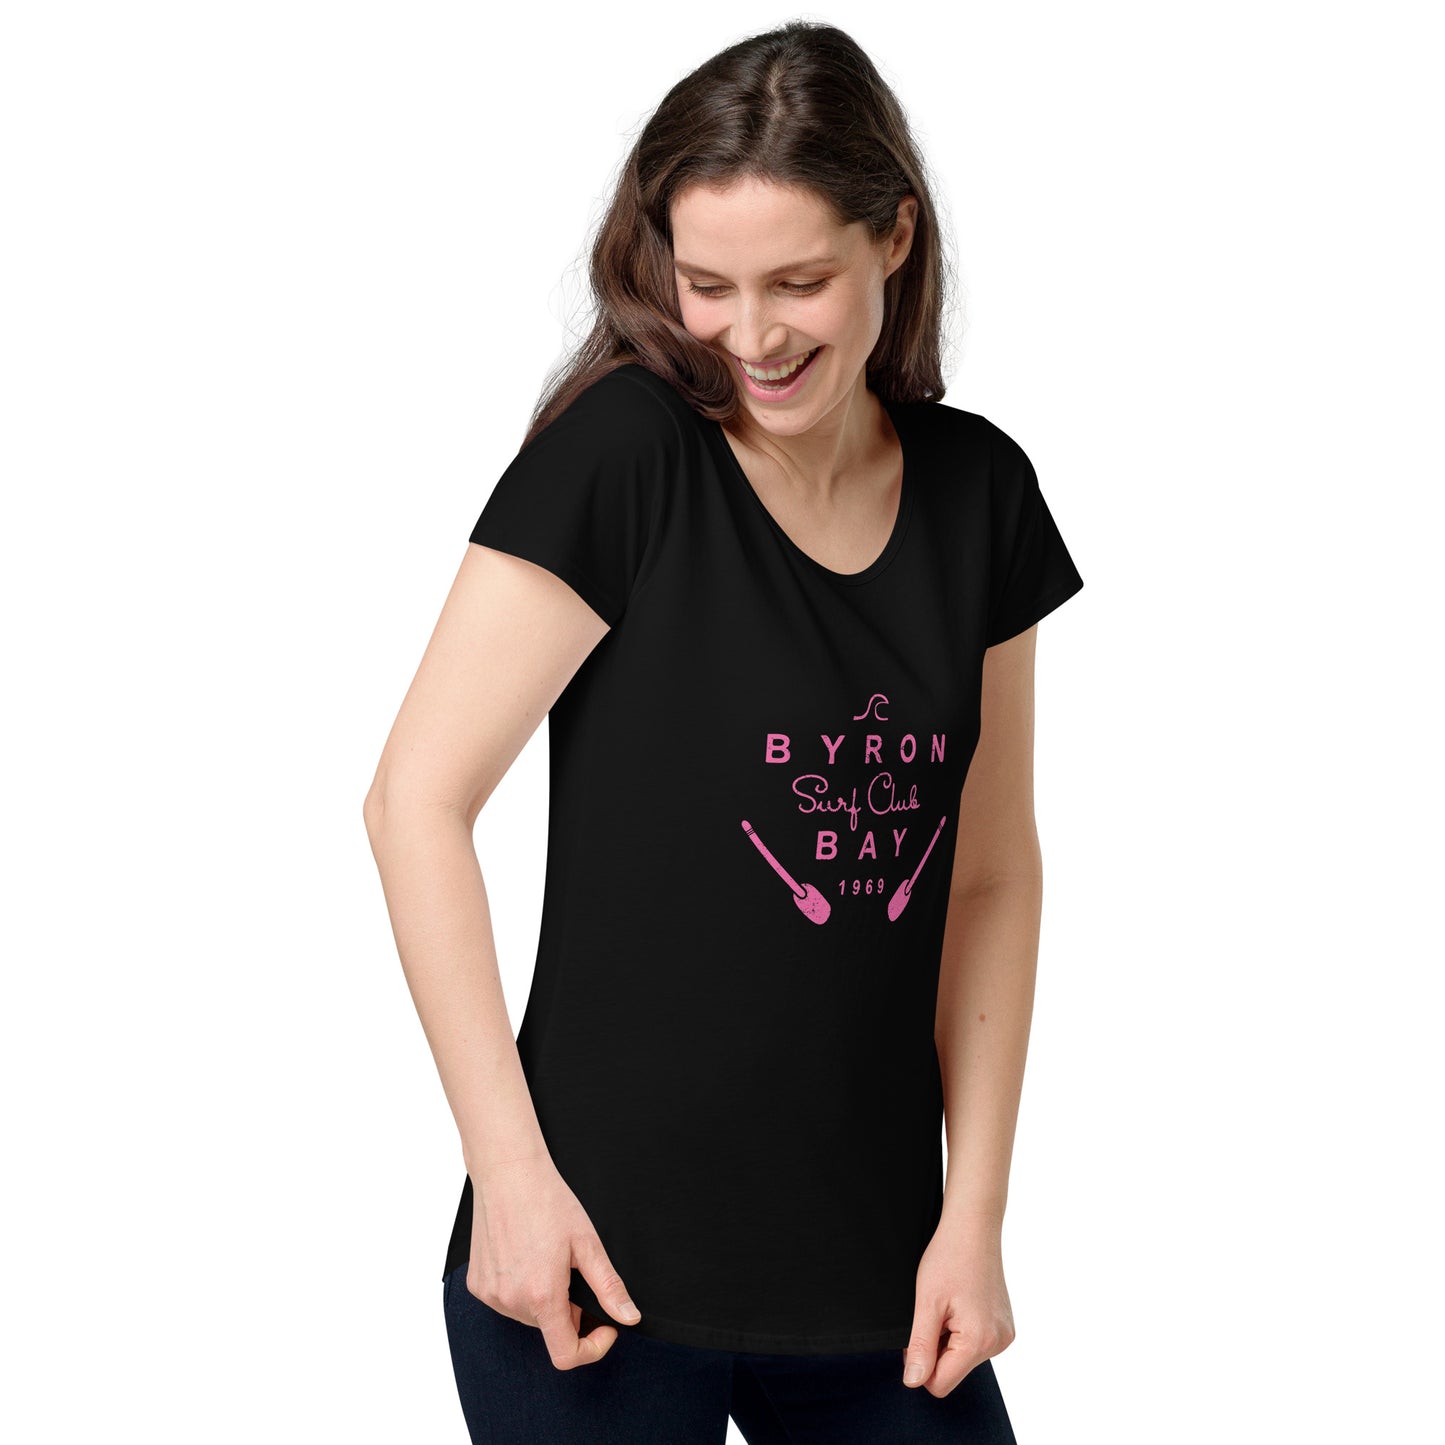  Women’s Round Neck Tee - Black - Front view, being warn by woman holding the bottom of the tee - pink Byron Bay Surf Club logo on front - Genuine Byron Bay Merchandise | Produced by Go Sea Kayak Byron Bay 